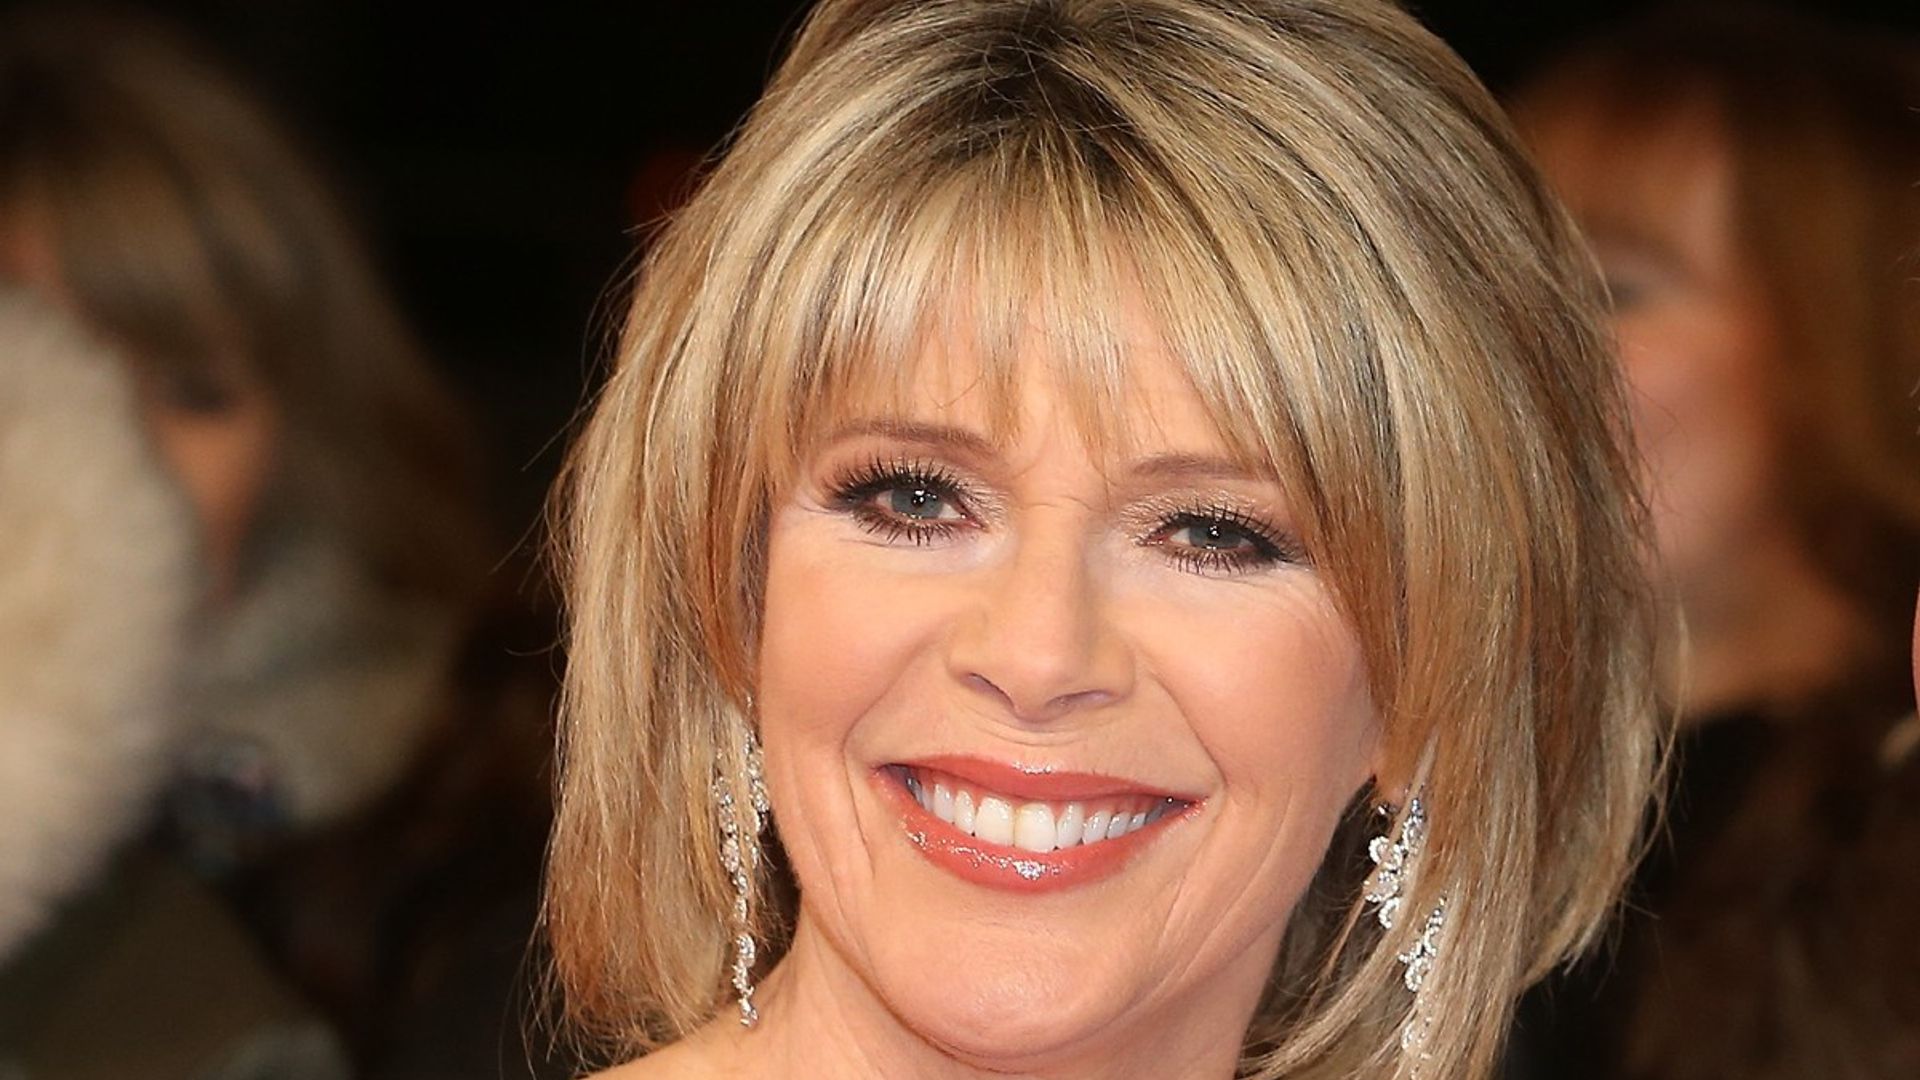 Ruth Langsford shows off delicious lunchtime spread – and our mouths are watering!